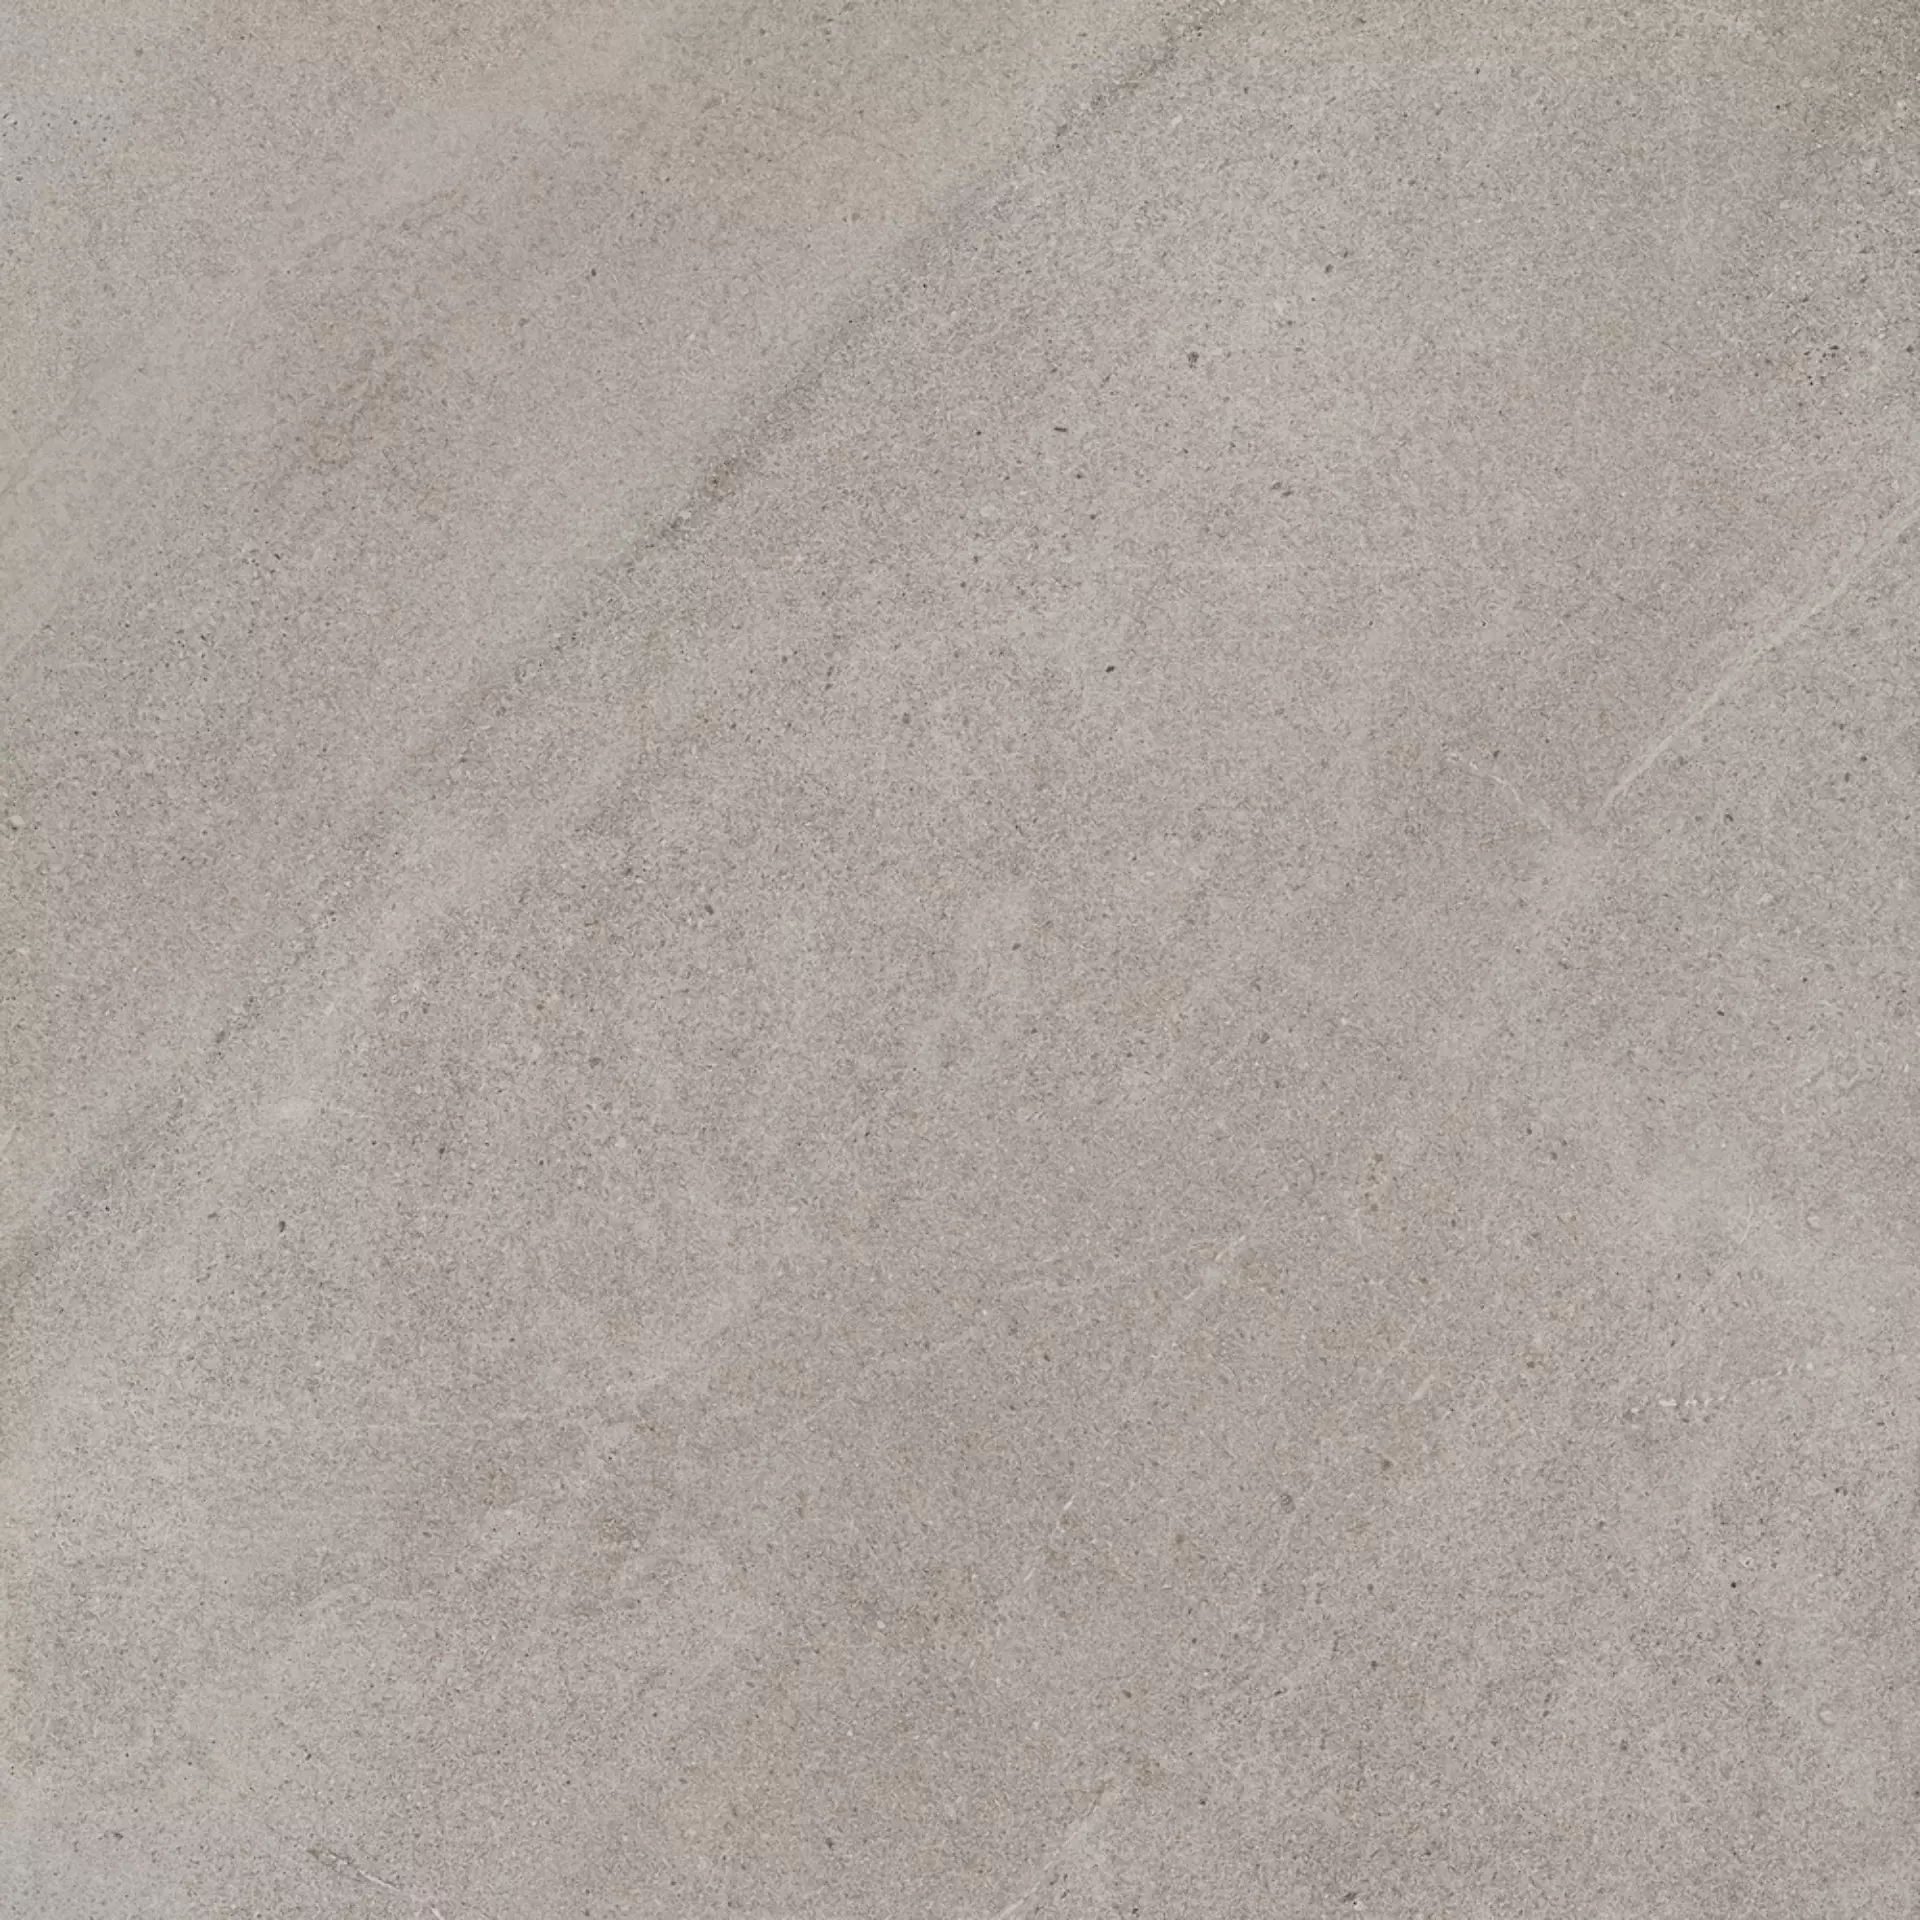 Cottodeste Limestone Oyster Blazed Protect EGWLS25 60x60cm rectified 14mm